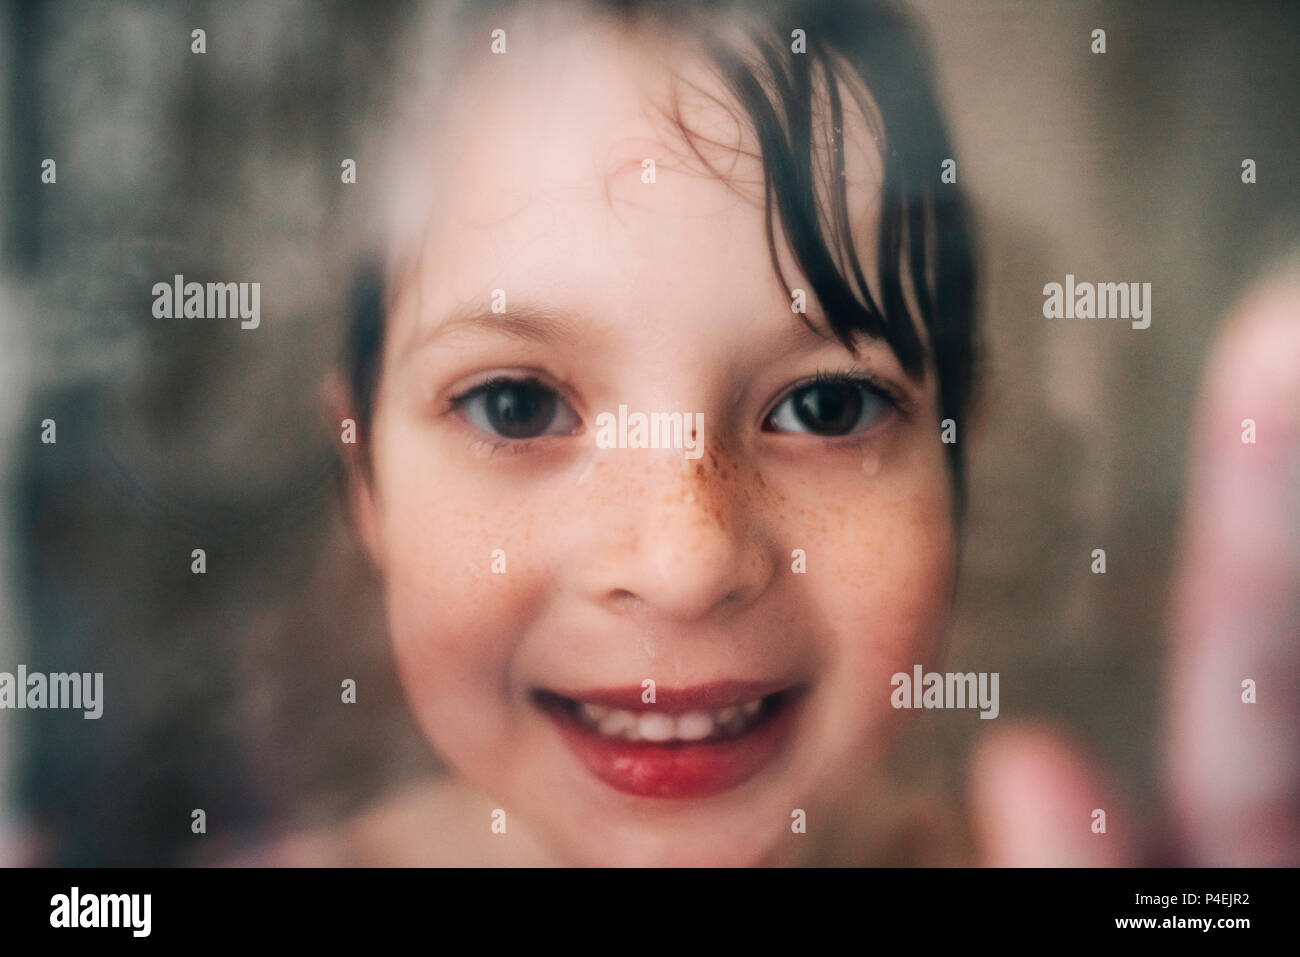 Portrait of a smiling girl looking through the wet shower glass Stock Photo